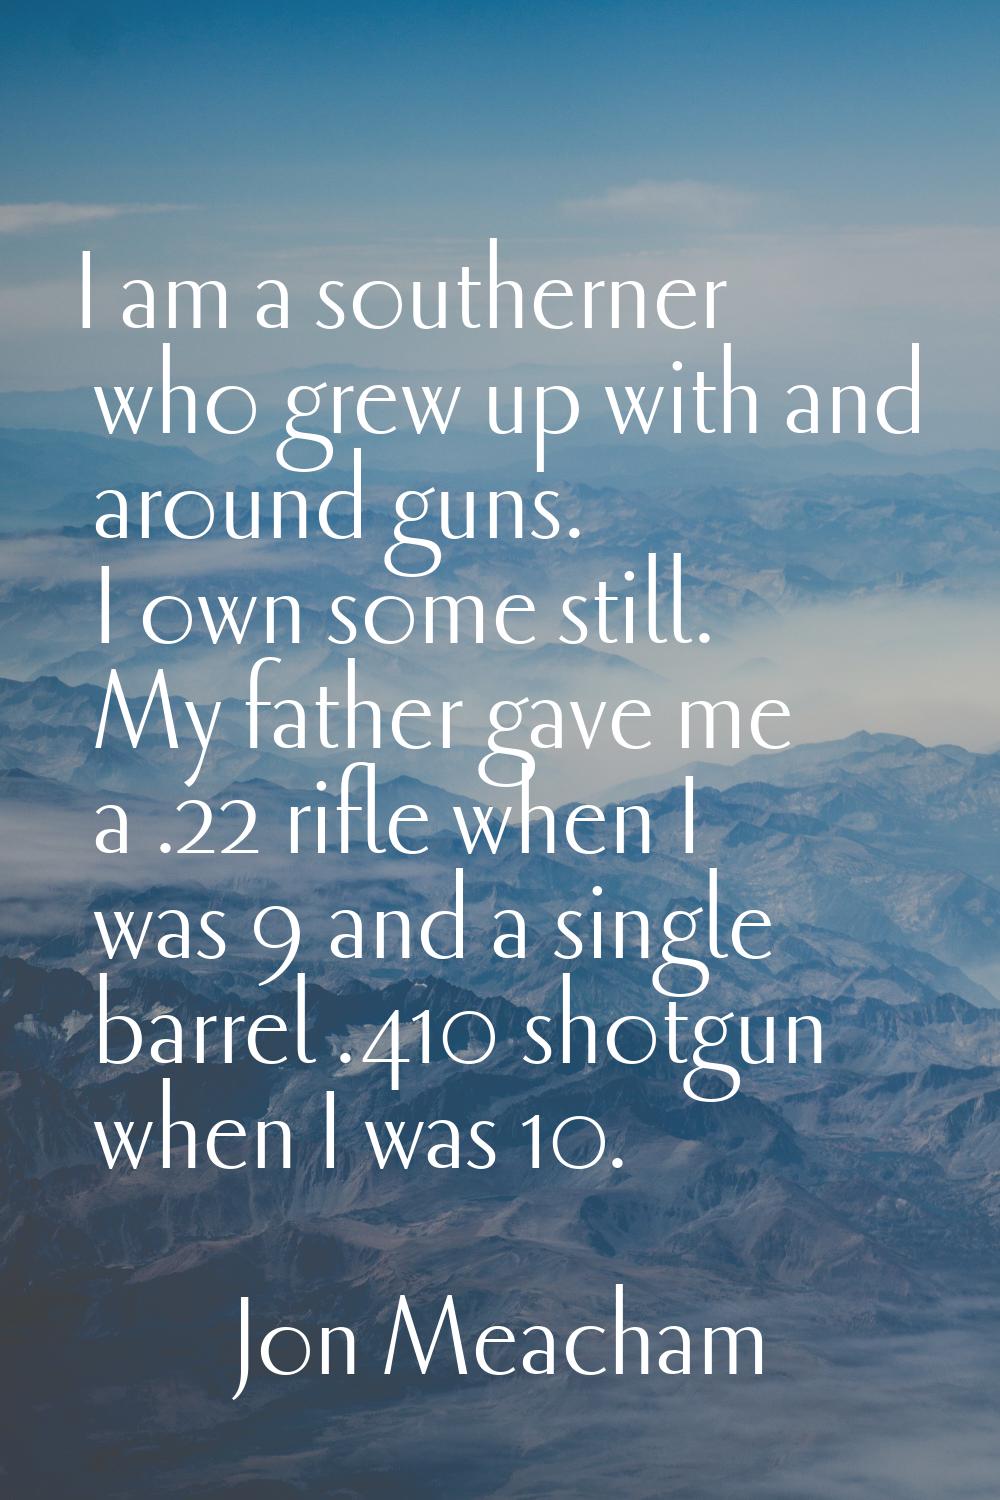 I am a southerner who grew up with and around guns. I own some still. My father gave me a .22 rifle